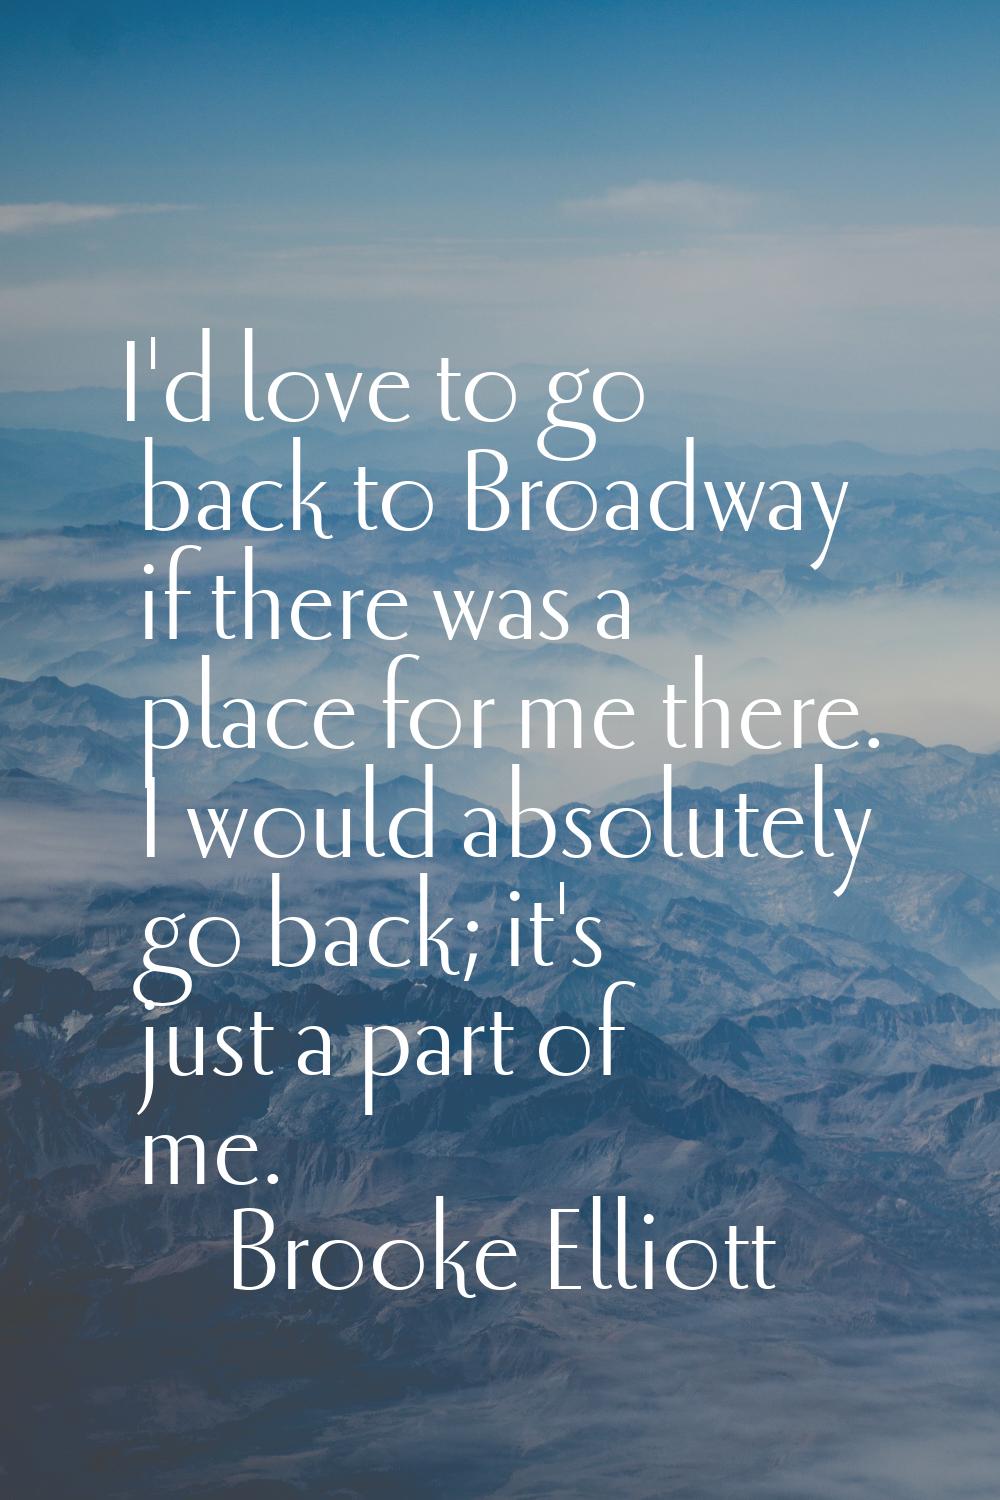 I'd love to go back to Broadway if there was a place for me there. I would absolutely go back; it's